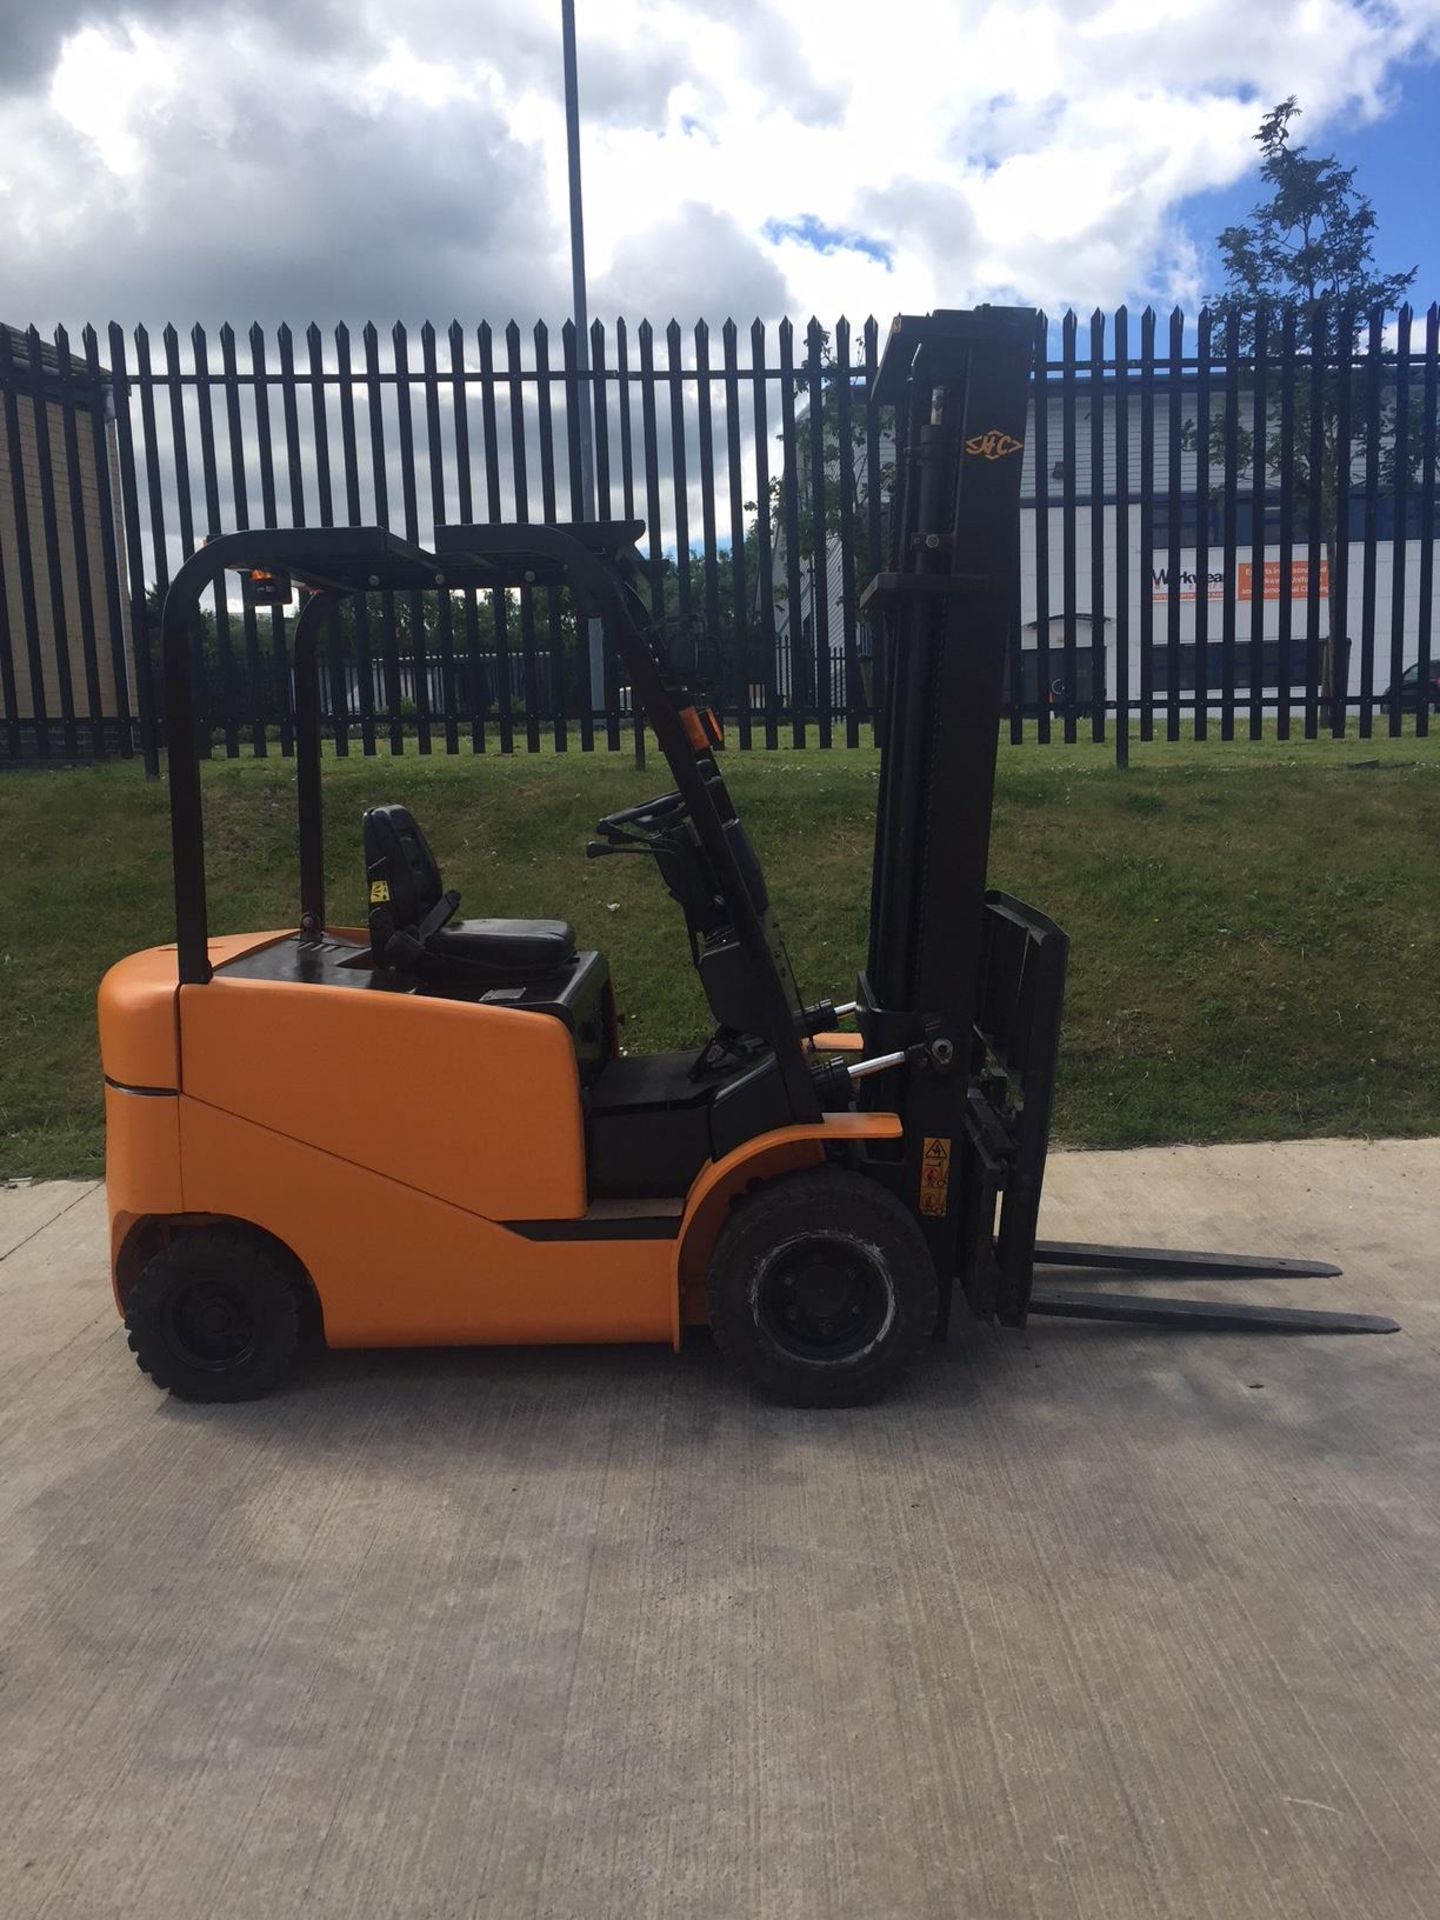 Sam-uk electric counterbalance fork lift truck - Fully refurbished and painted. - Image 3 of 9